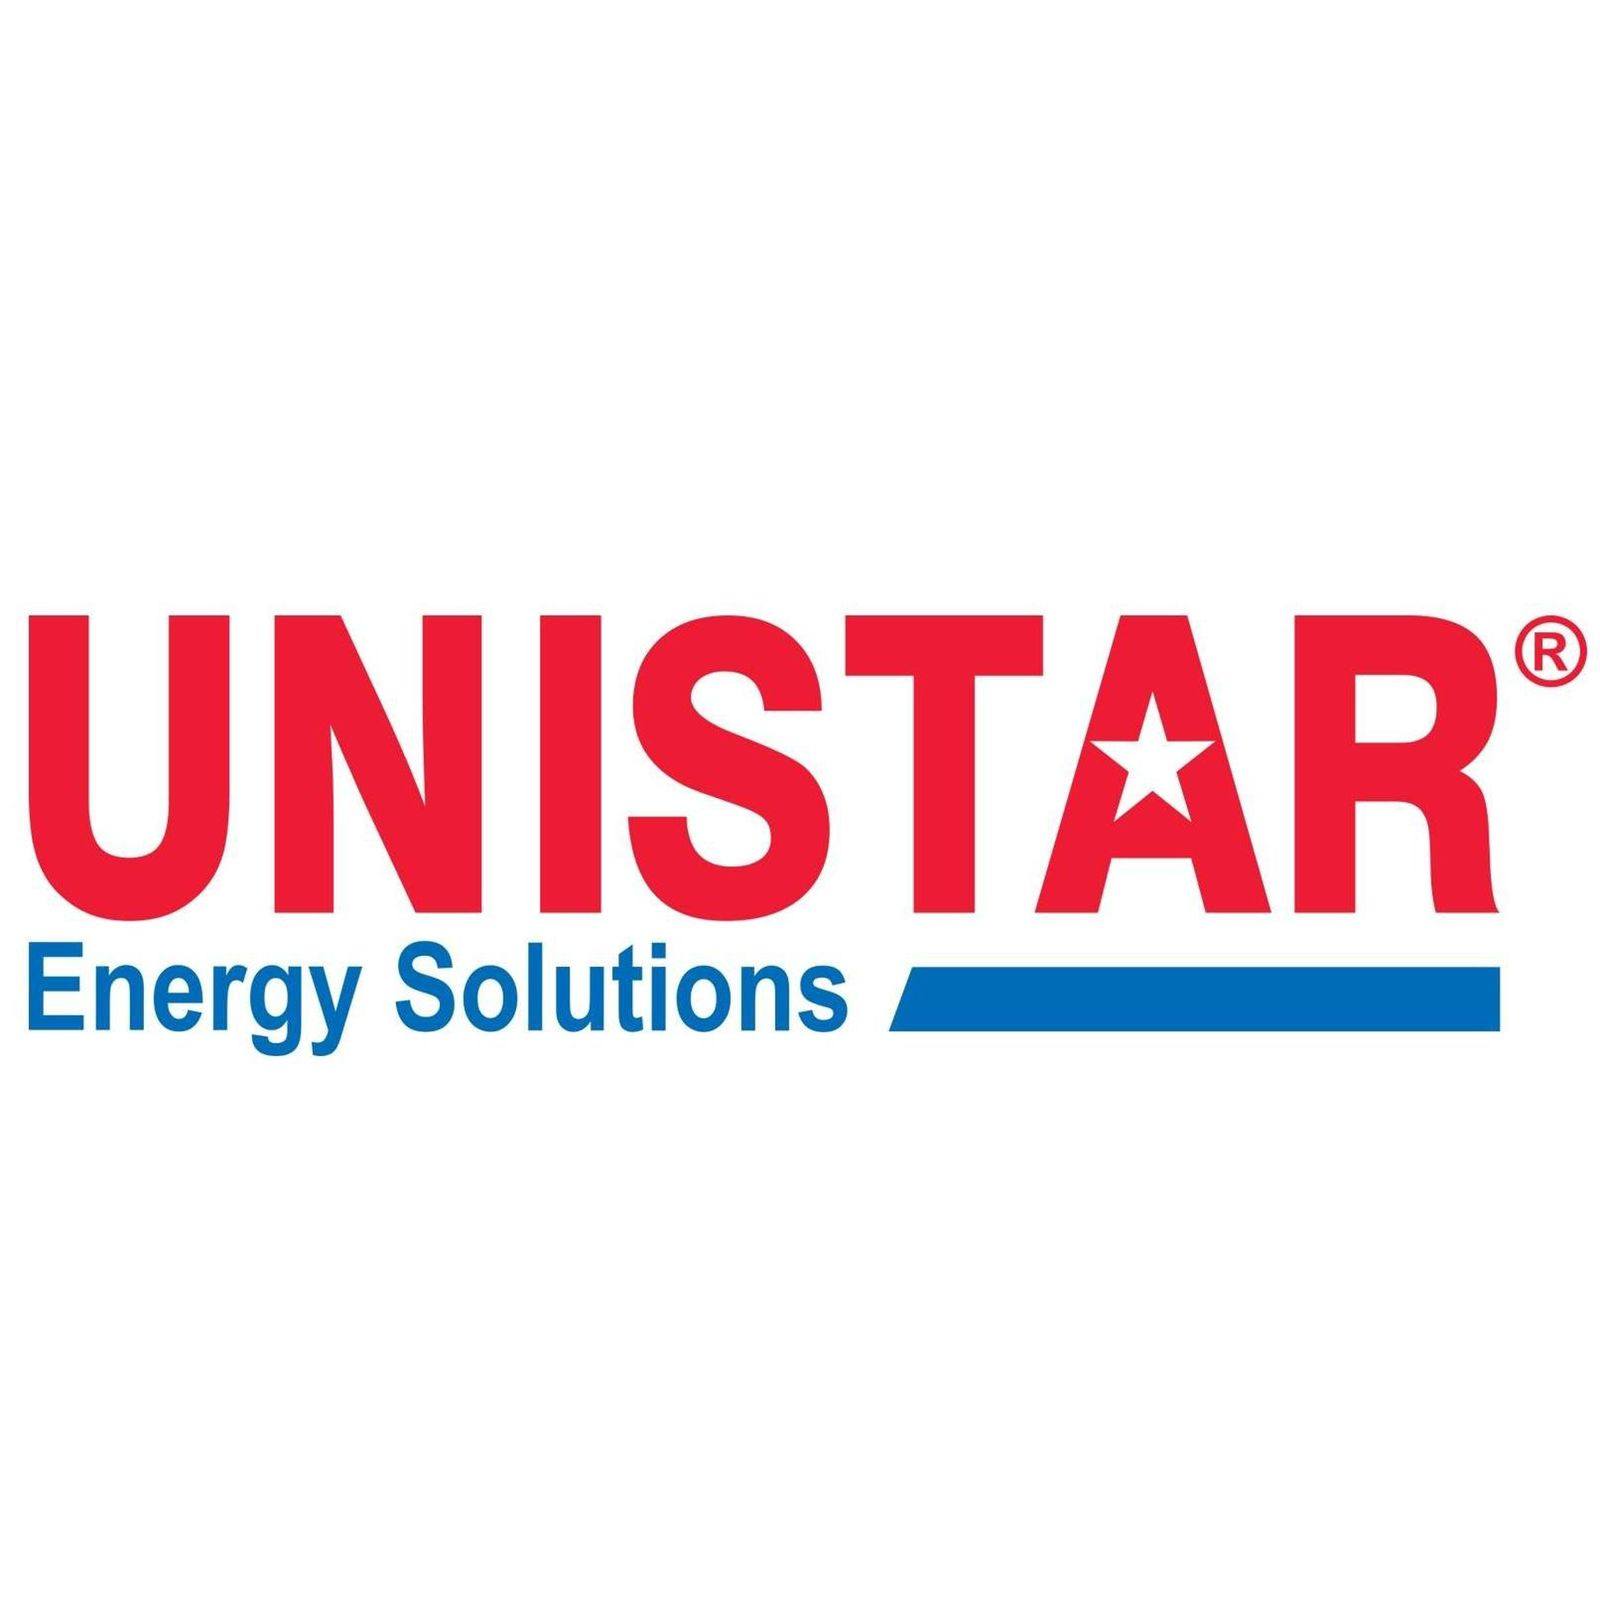 Unistar manufacturing energy